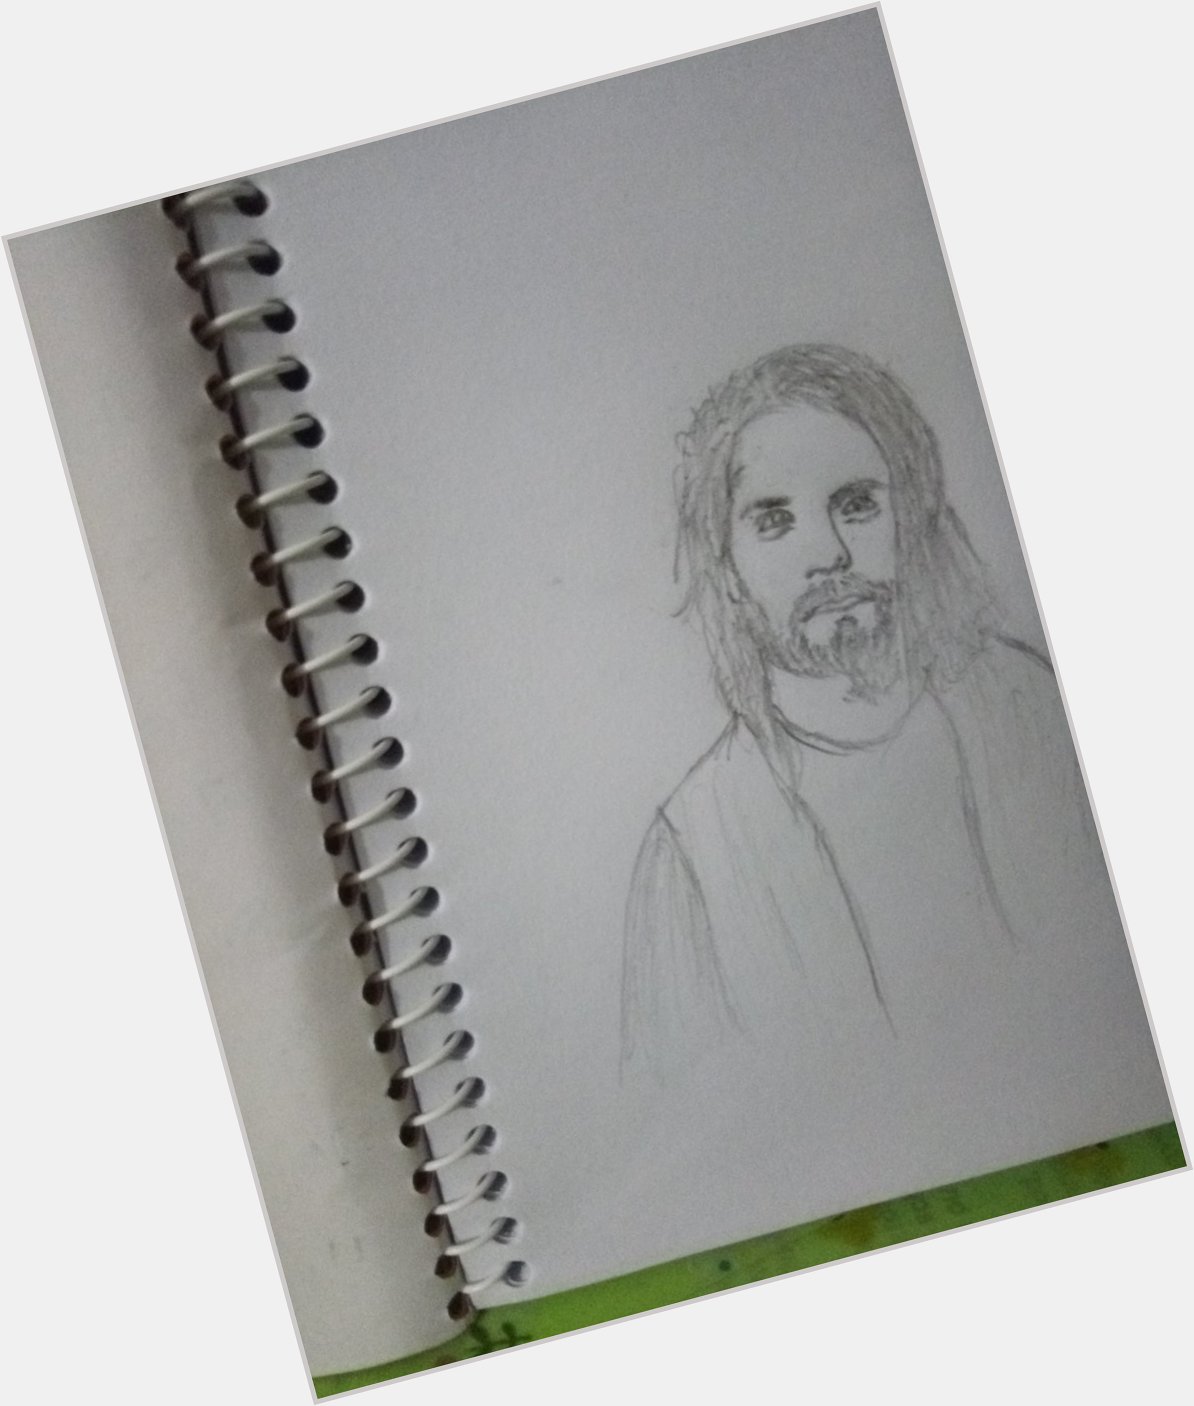  Just now the drawing is done!!
HAPPY BIRTHDAY  SETH ROLLINS
May you day pass nicely  